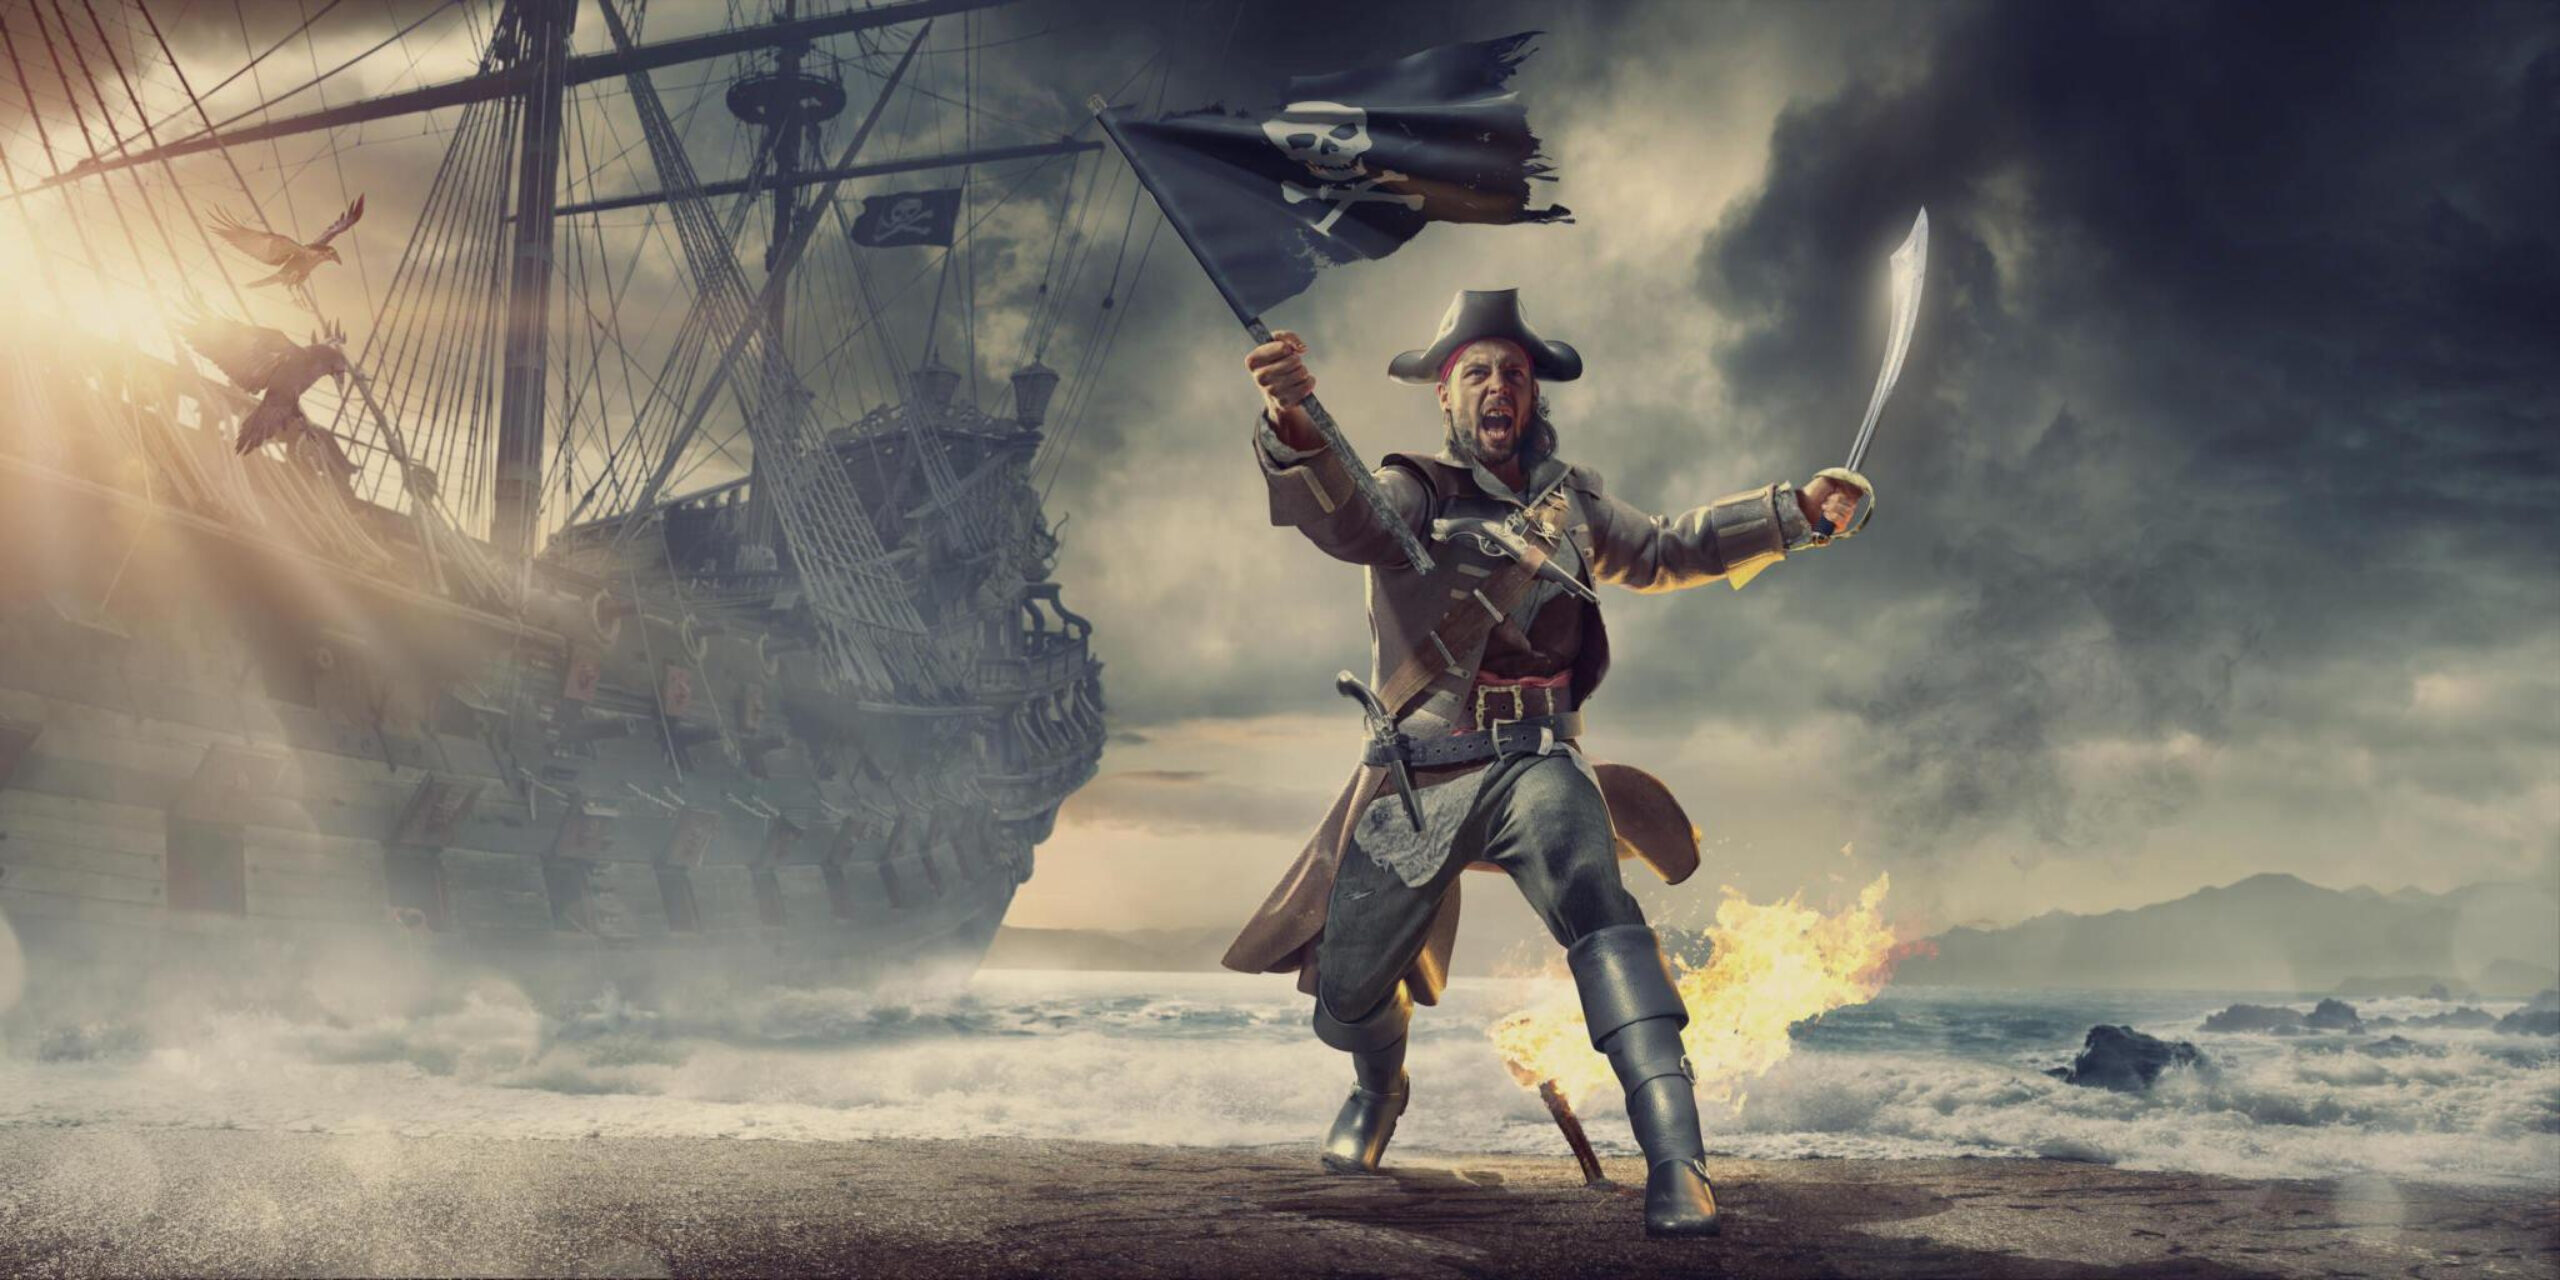 The Golden Age of Piracy: An Introduction - Photo by Istock at Istock